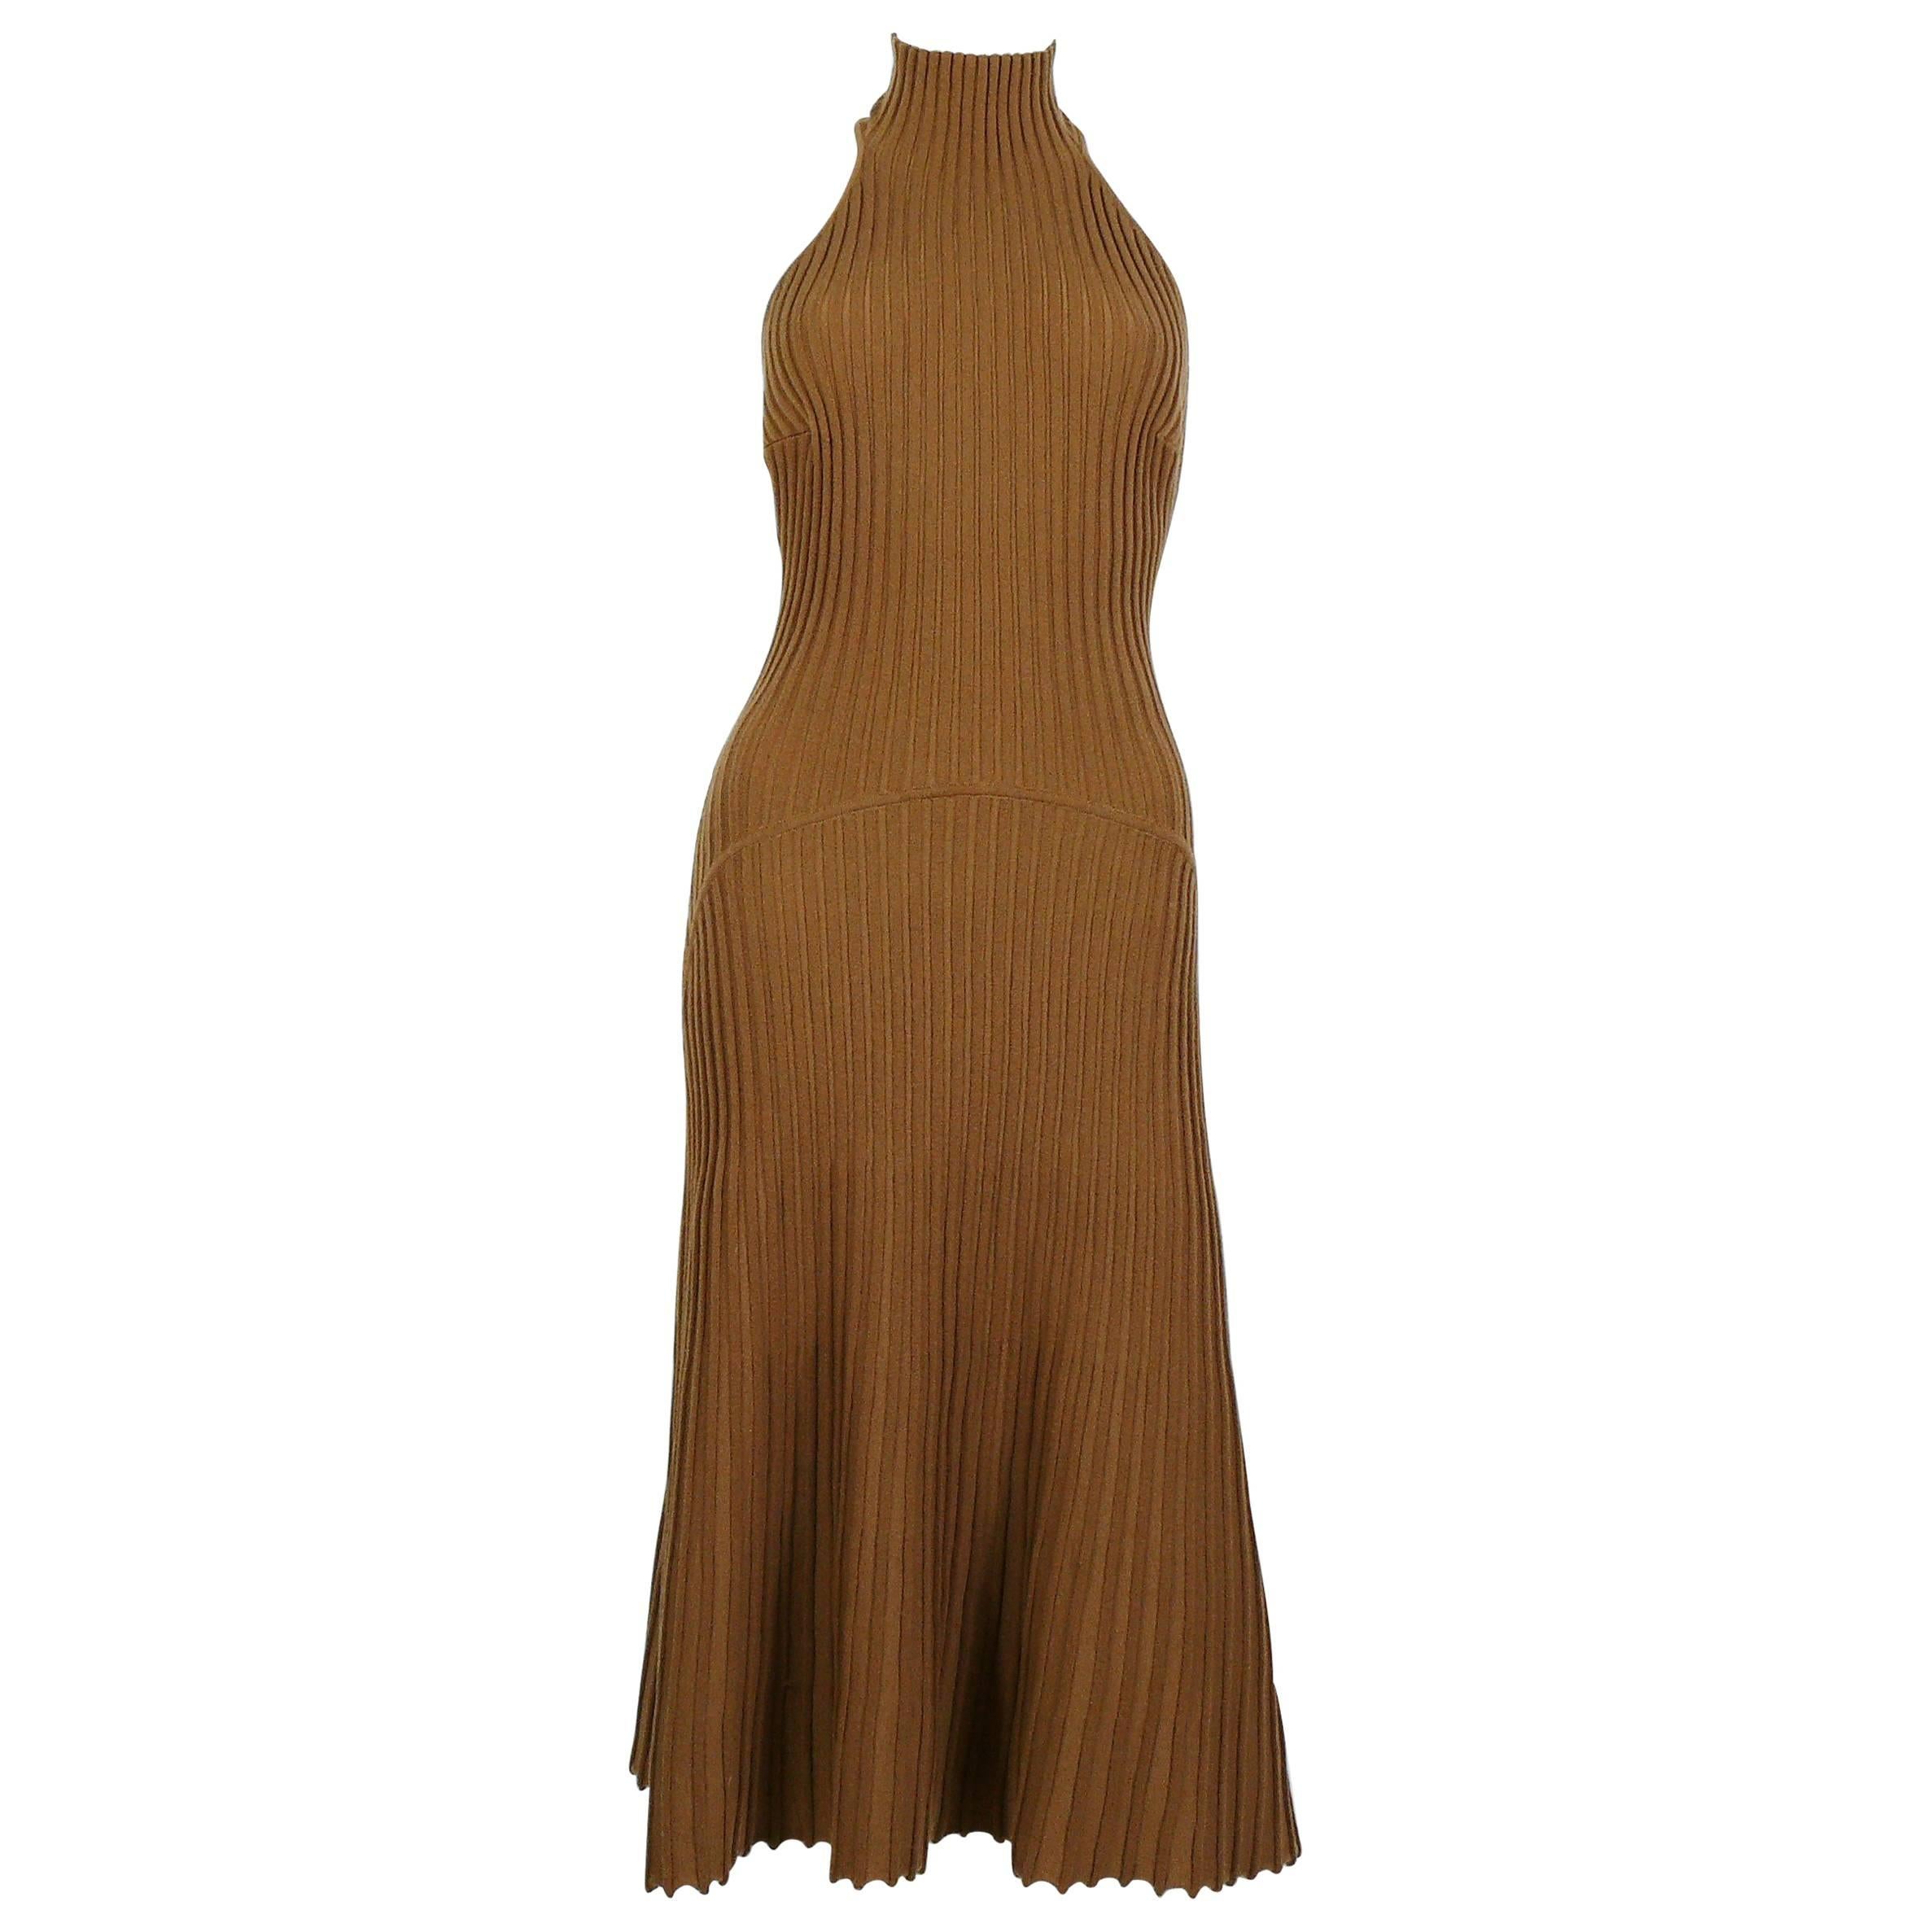 Gianni Versace Couture Vintage Halter Neck Knitted Dress For Sale